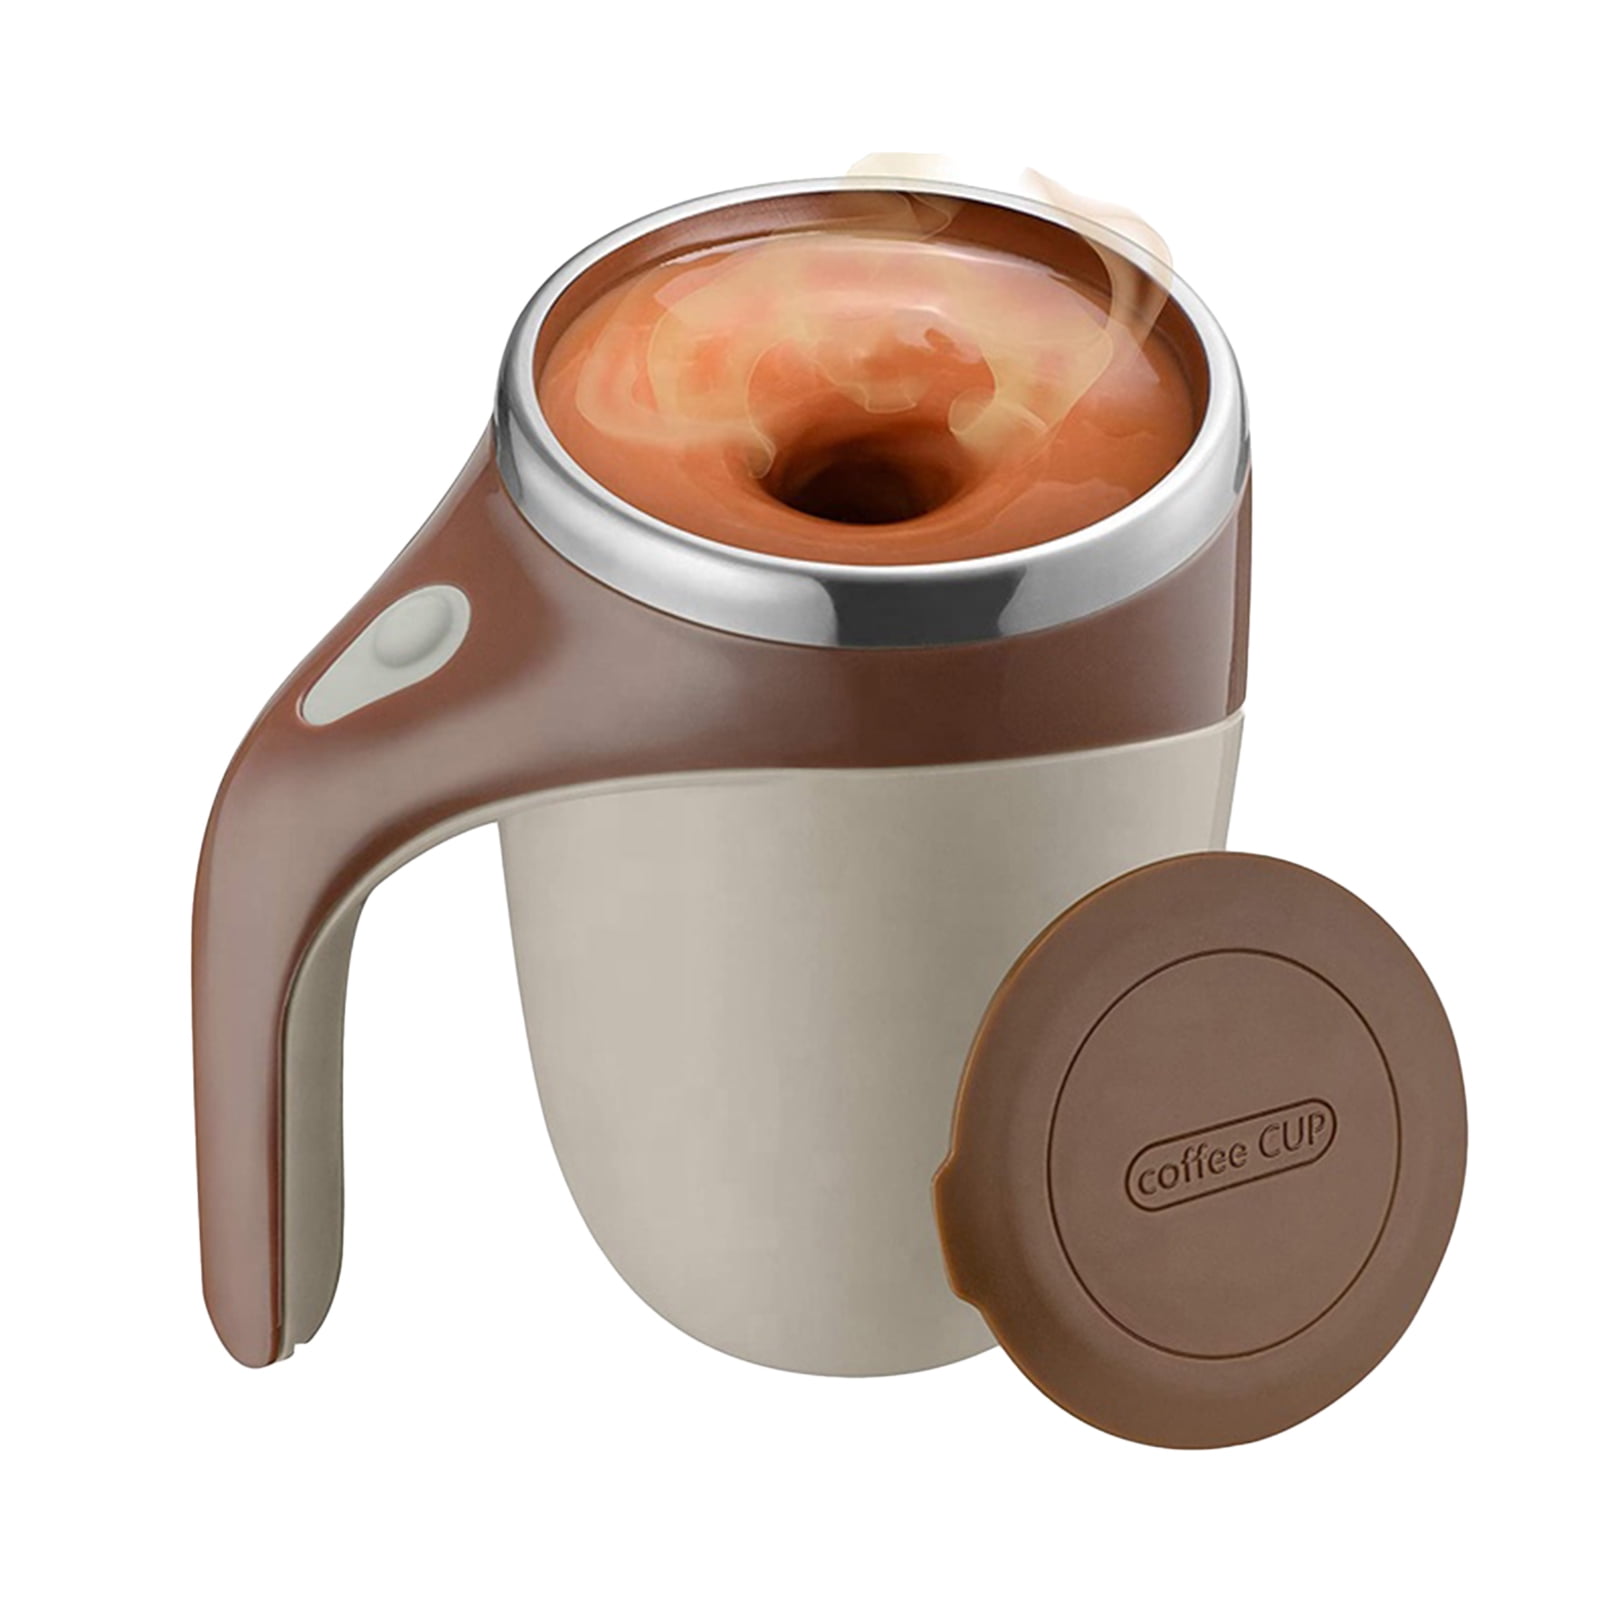 Multifunctional Magnetic Stirring Cup, Magnetic Self-stirring Coffee Cup